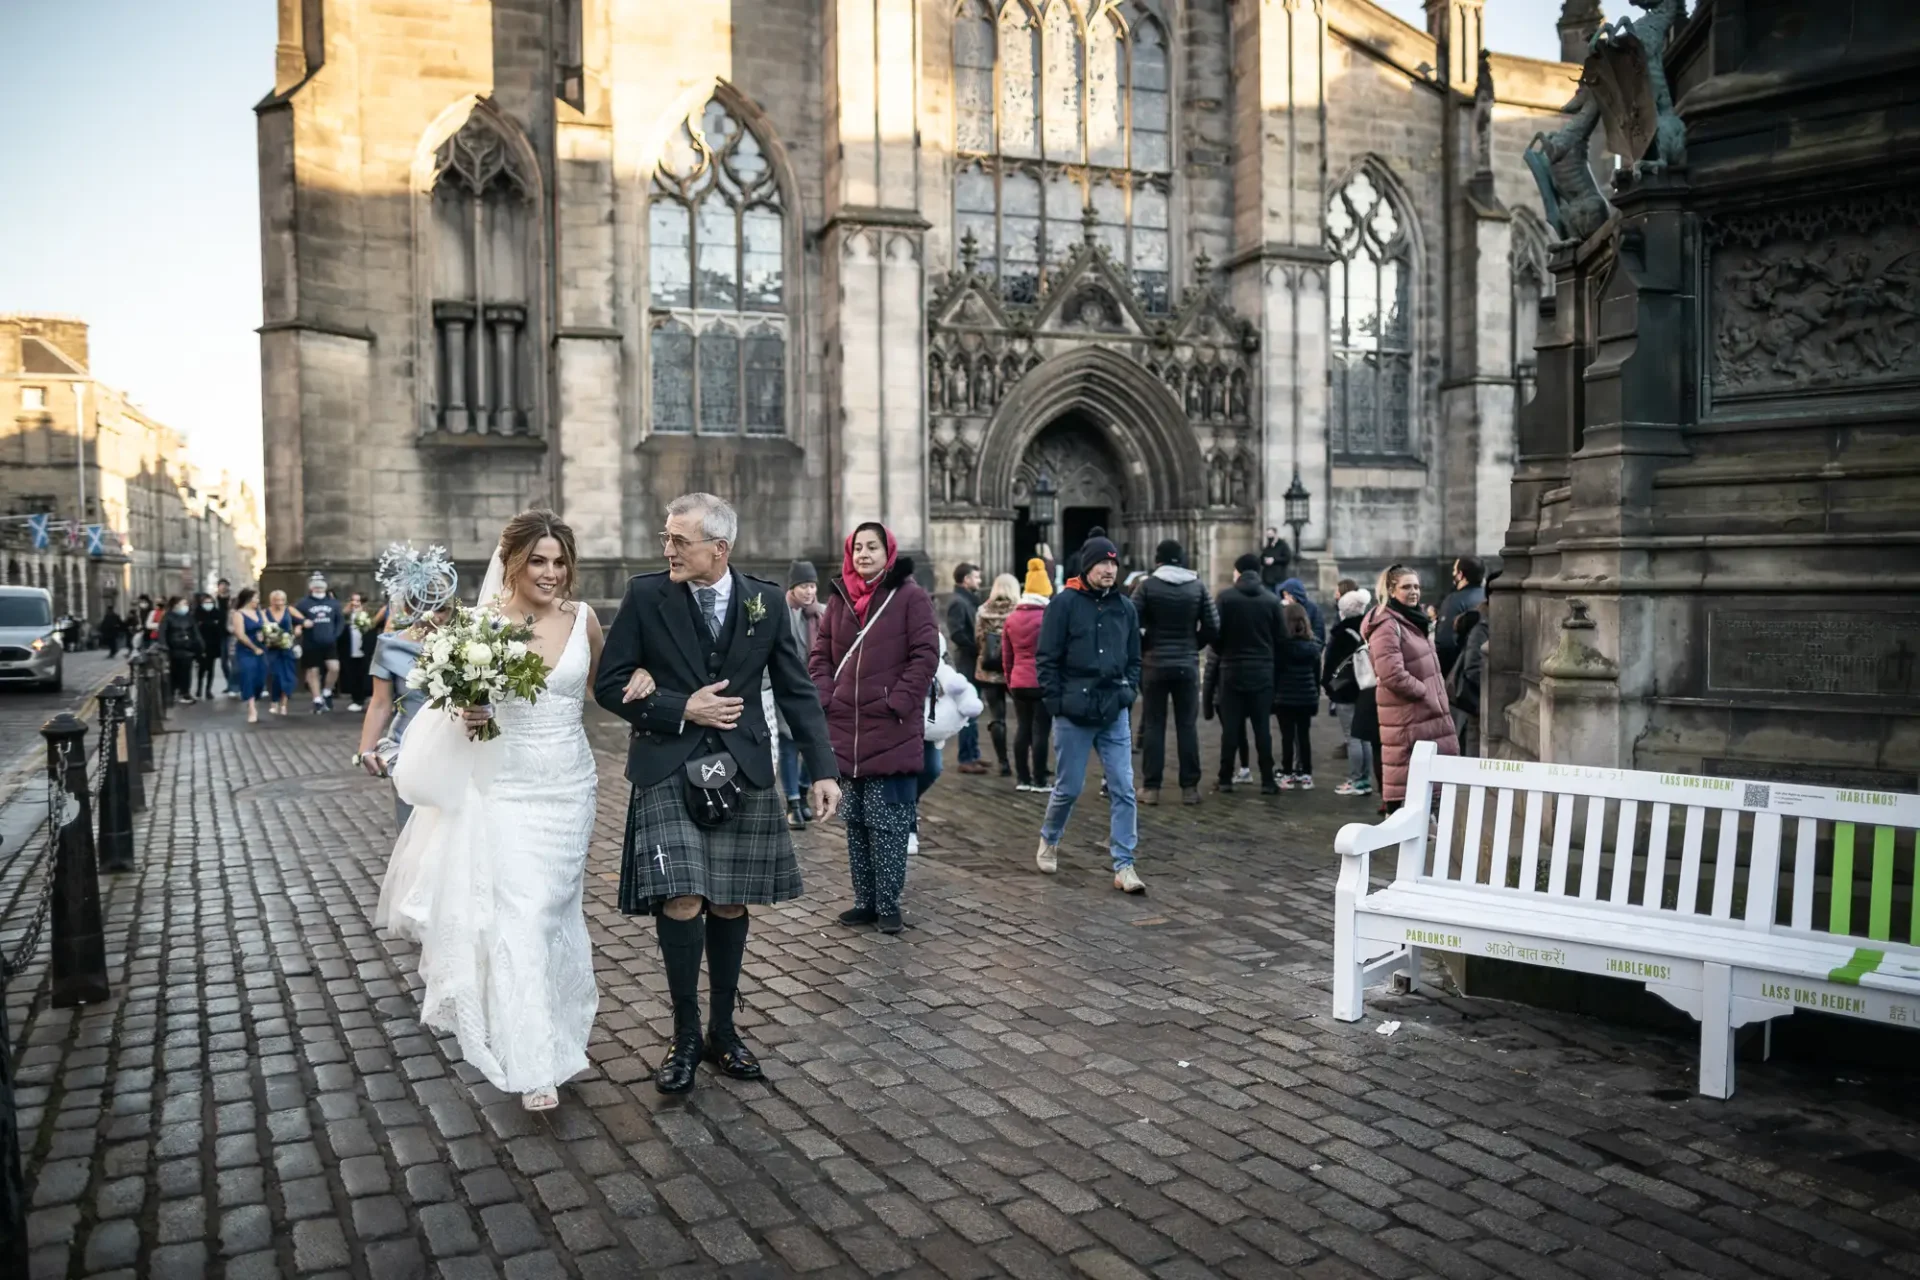 A bride and groom, dressed in traditional scottish attire, walk hand-in-hand outside a historic cathedral, with onlookers in the background.